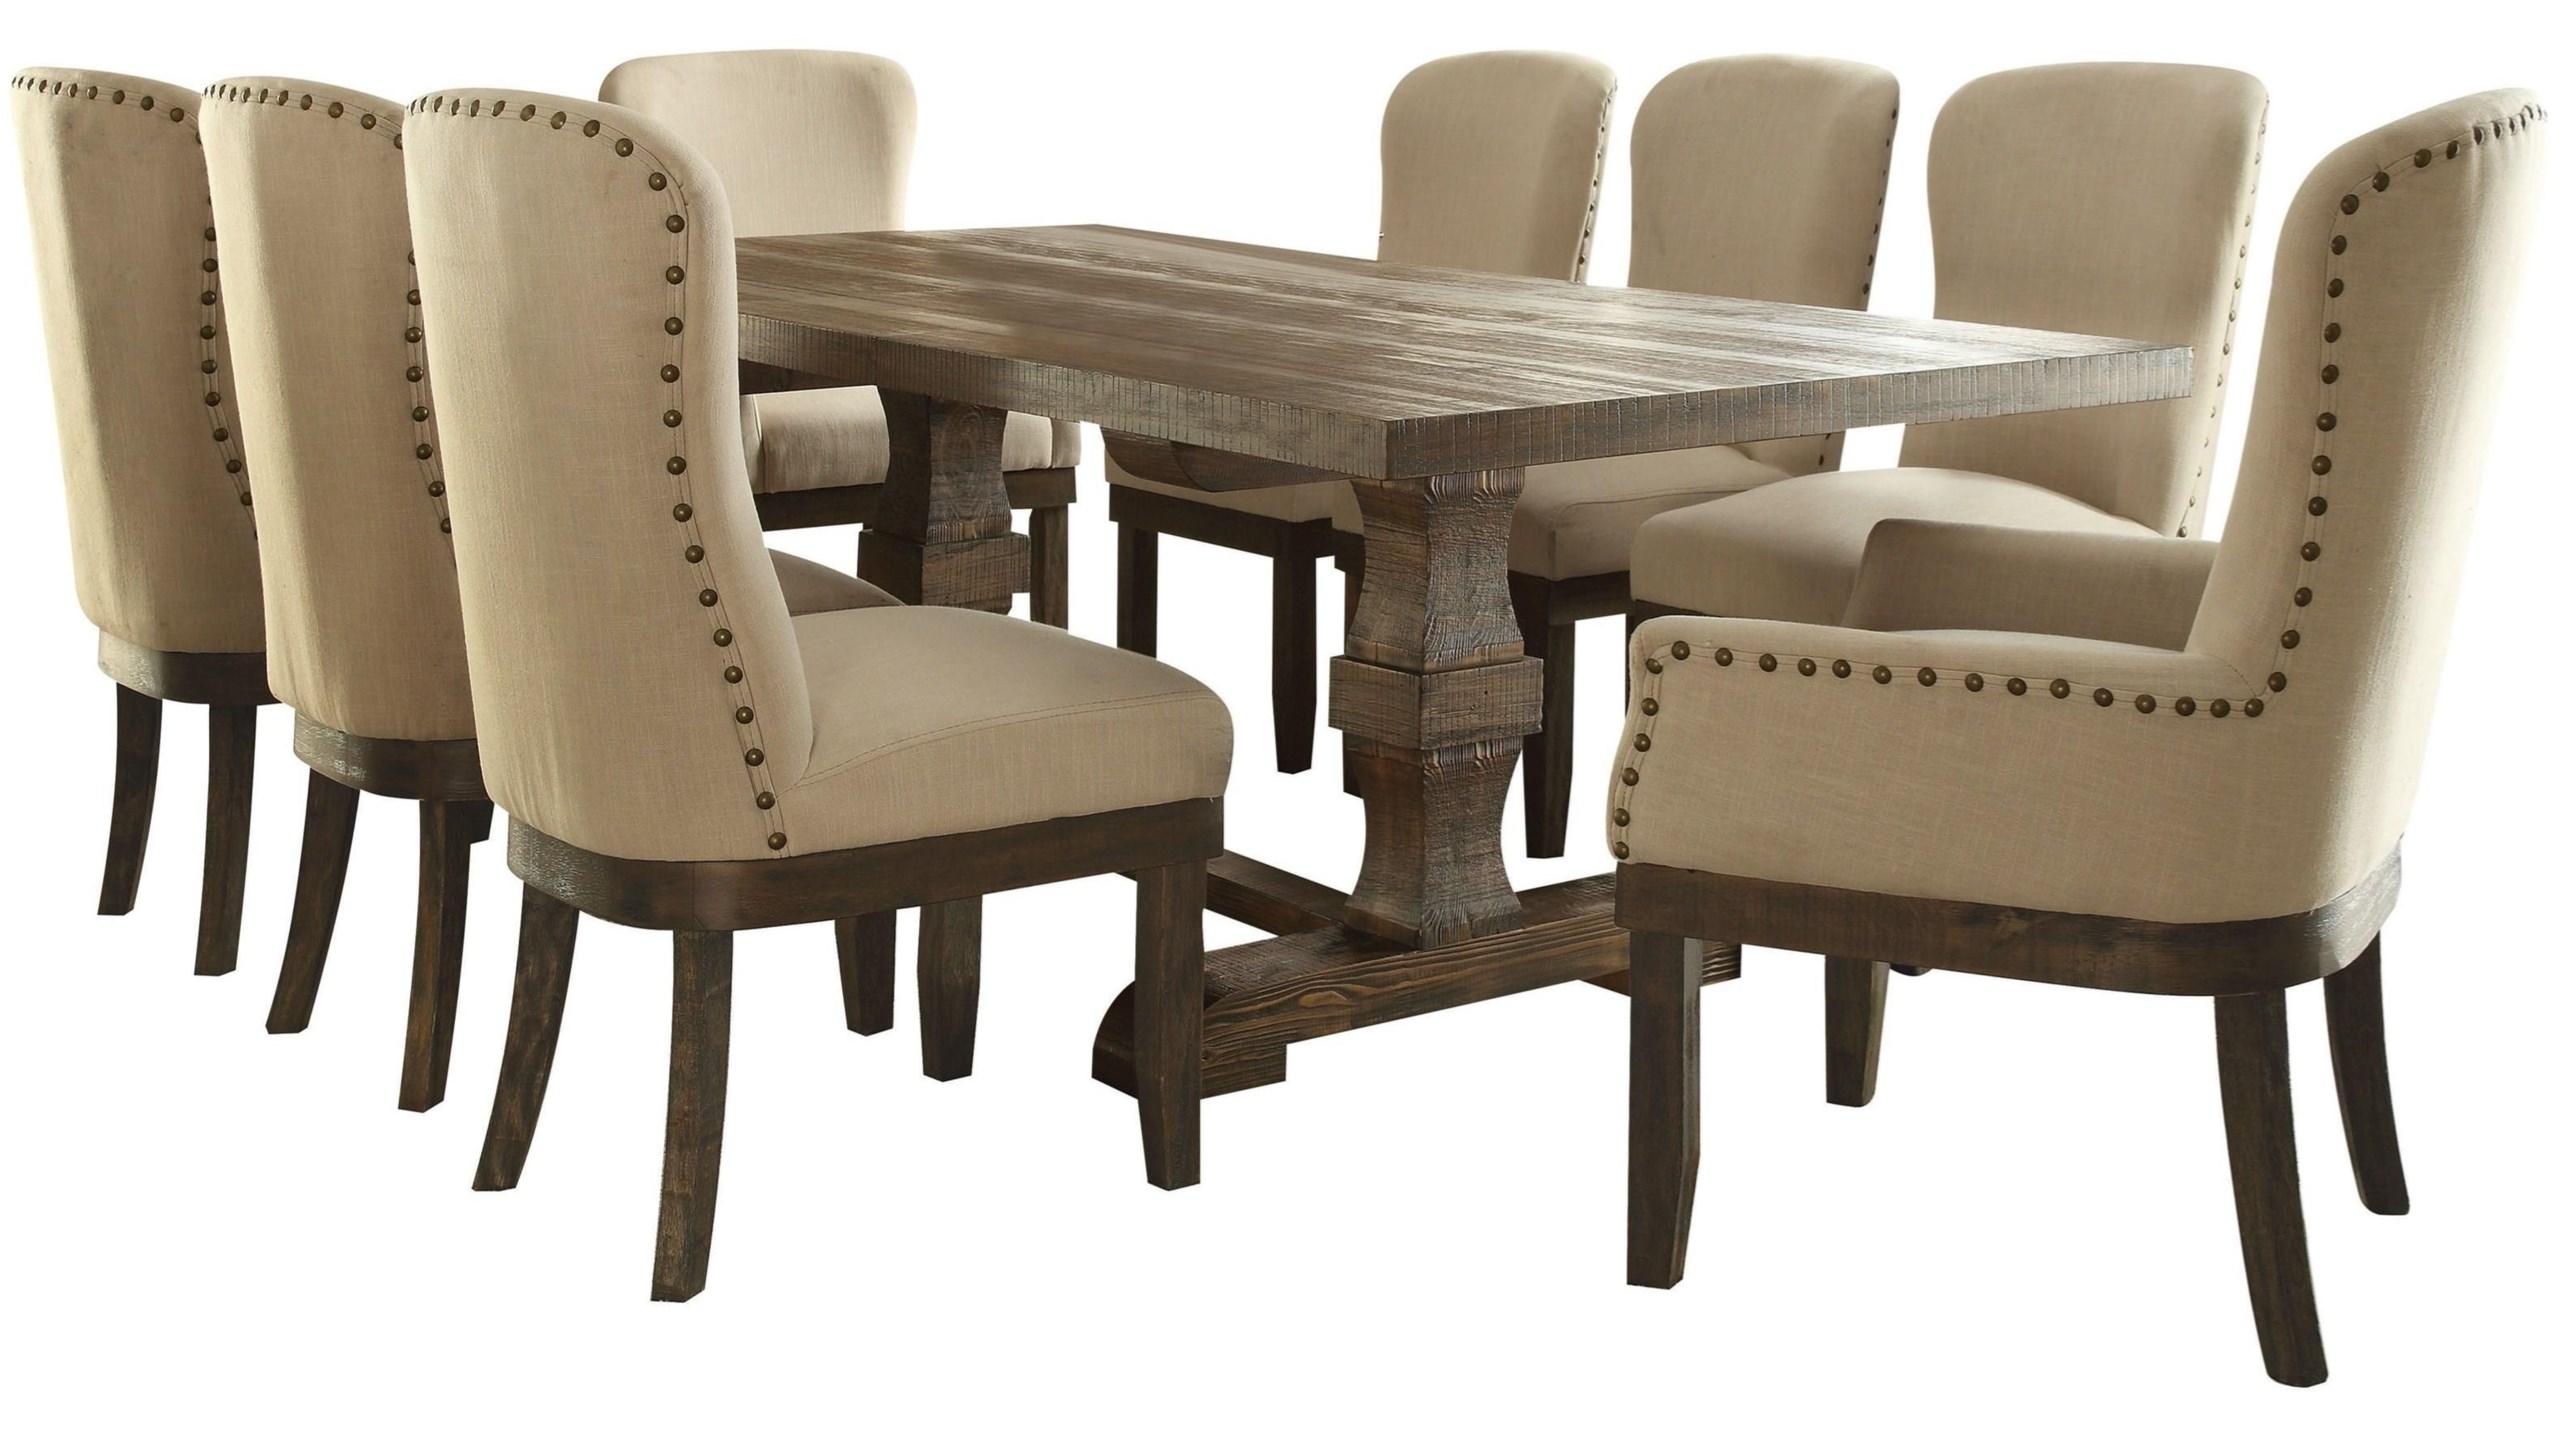 Traditional, Rustic Dining Room Set Landon 60737-9pcs in Brown Linen